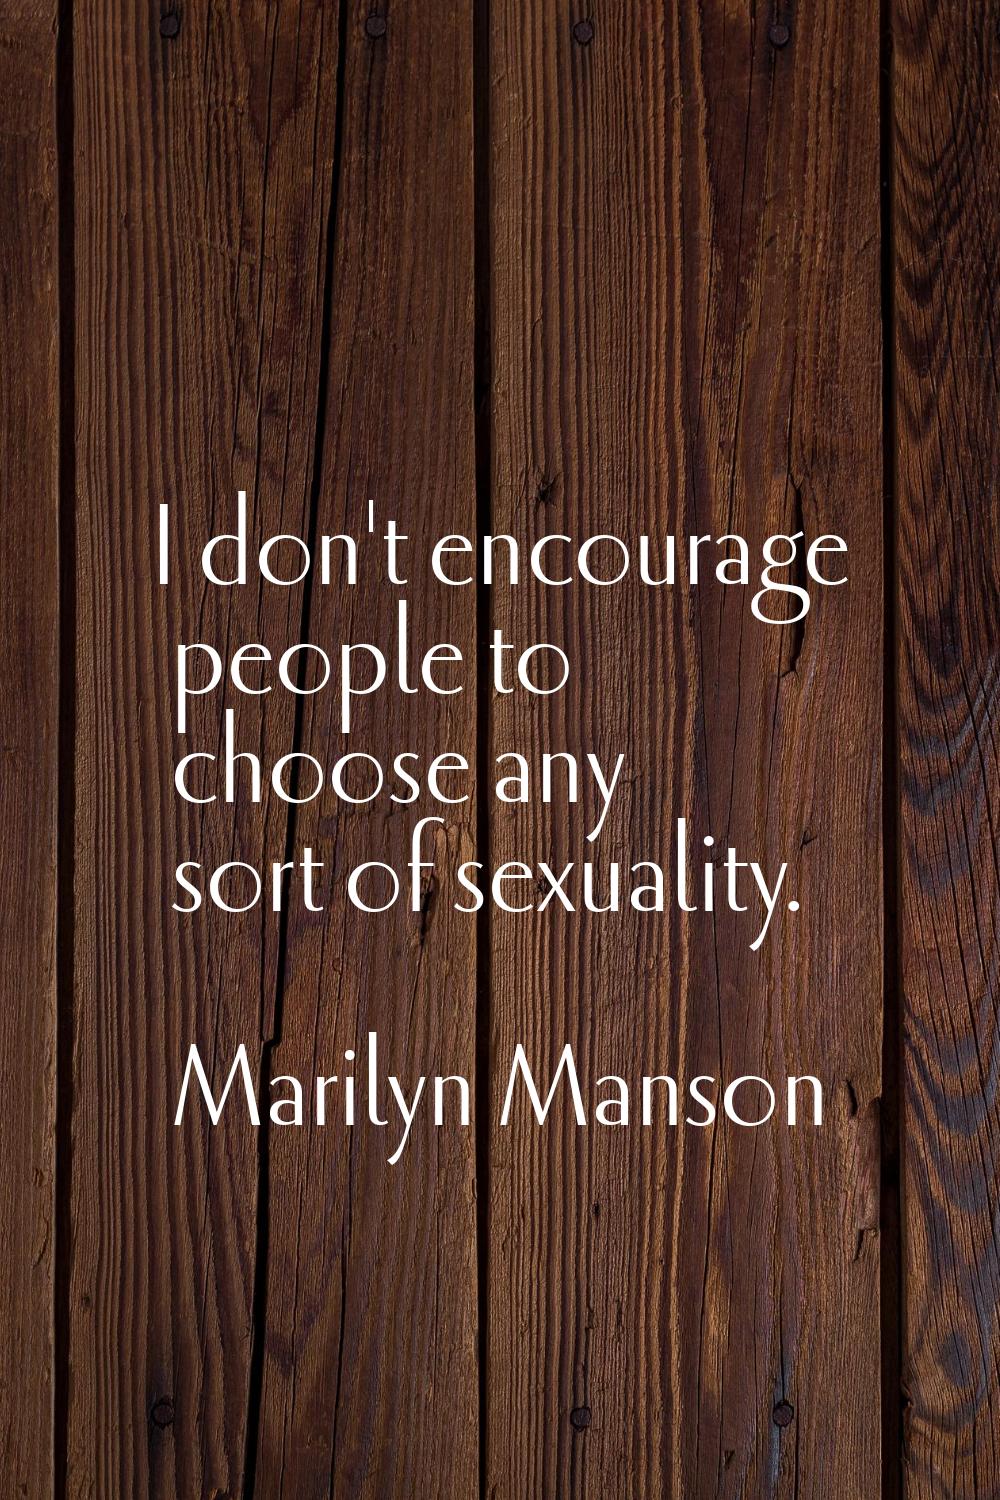 I don't encourage people to choose any sort of sexuality.